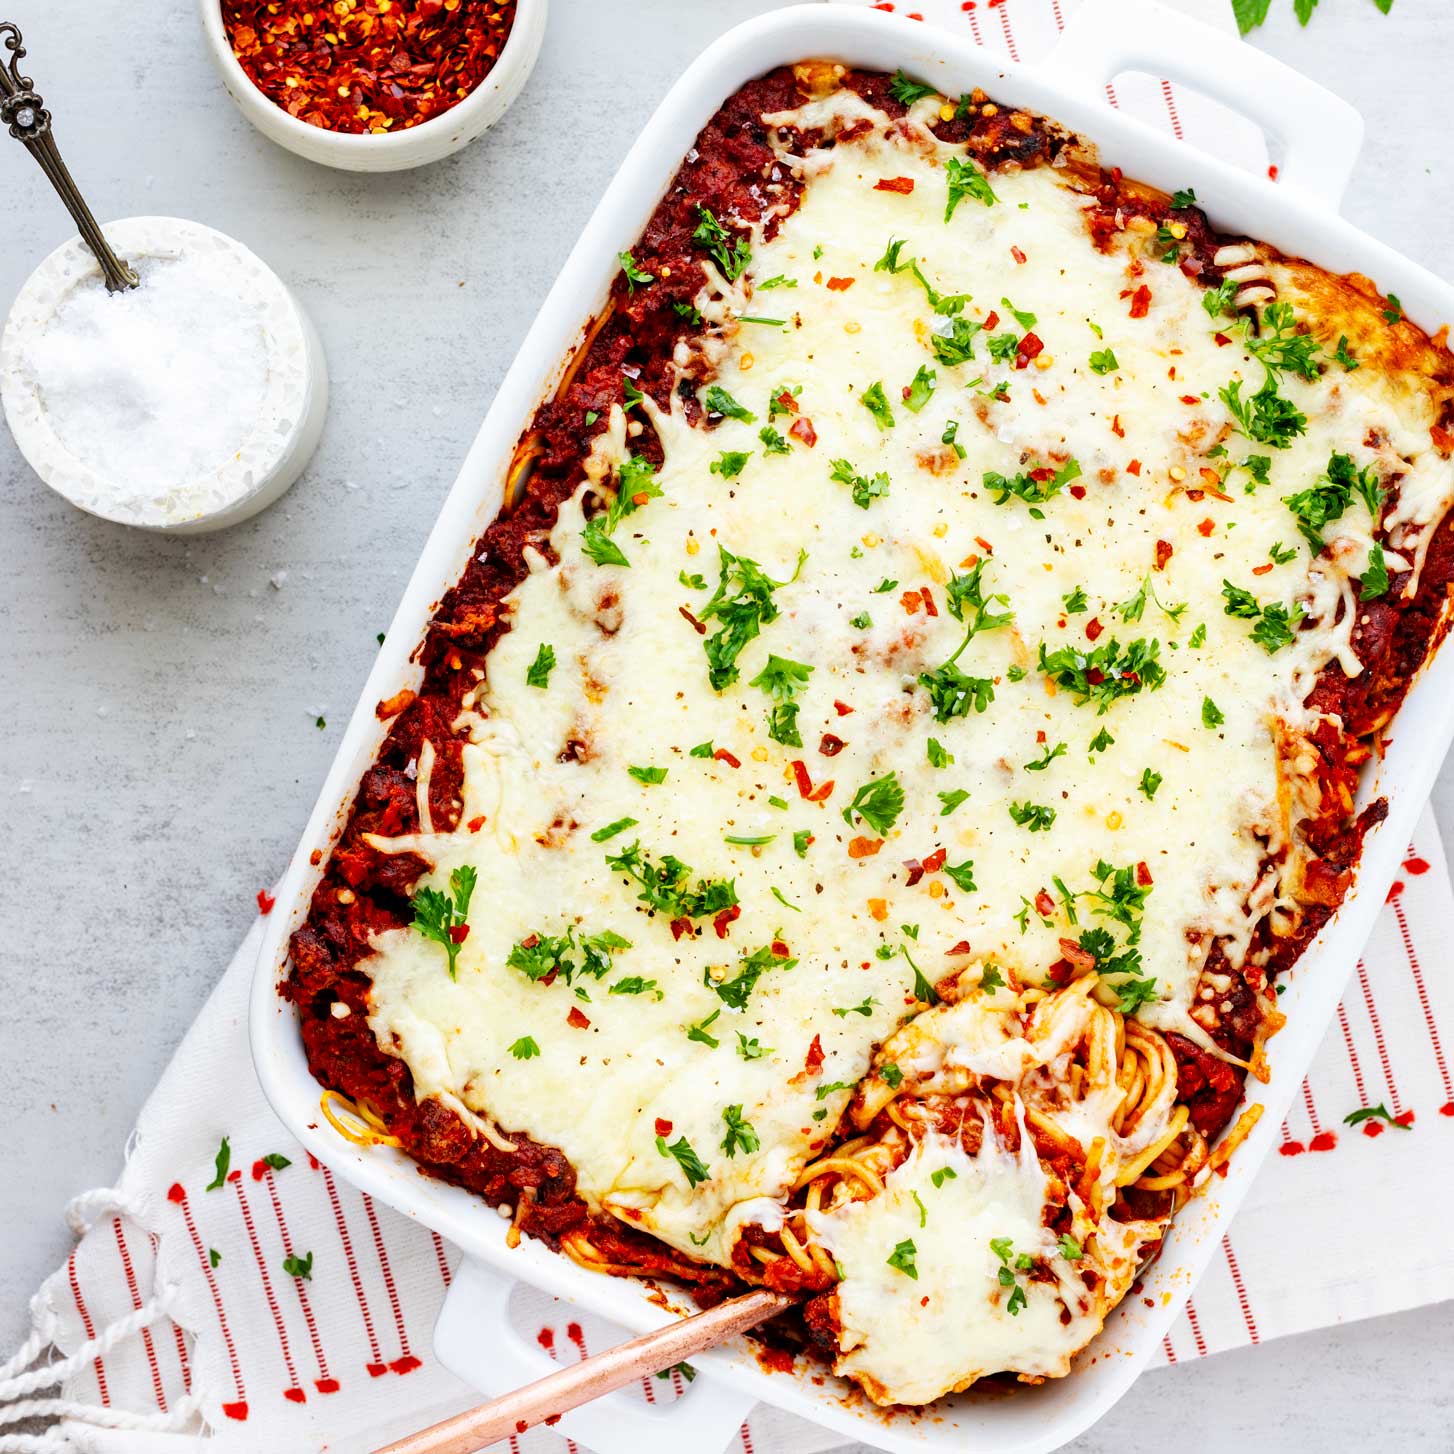 Overhead photo of a casserole dish with baked spaghetti with cream cheese and a serving spoon coming from it.